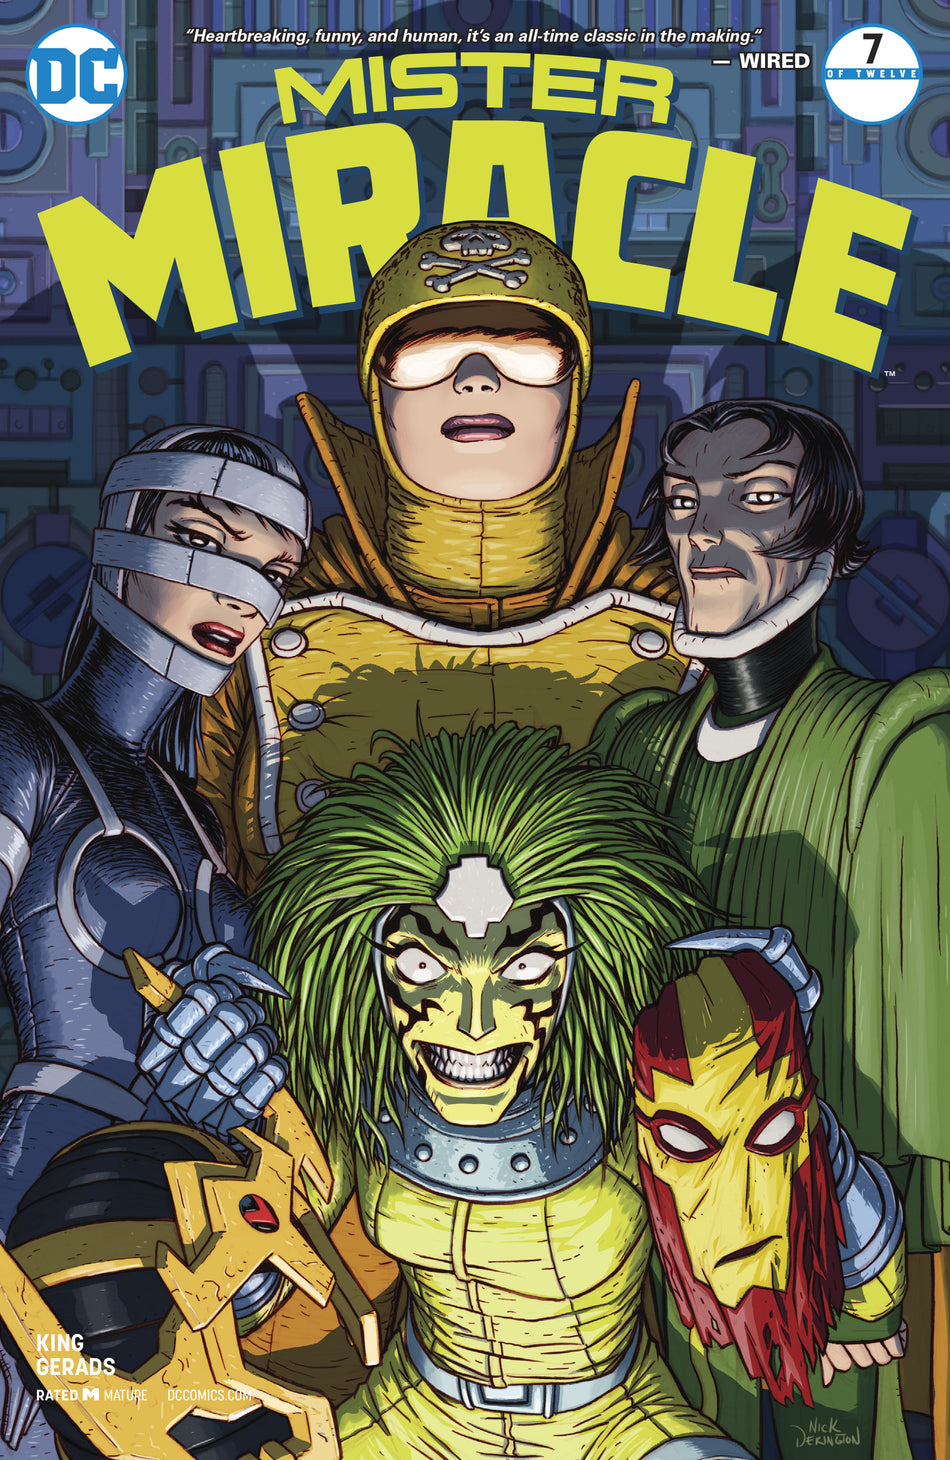 Photo of Mister Miracle Issue 7 (of 12) comic sold by Stronghold Collectibles